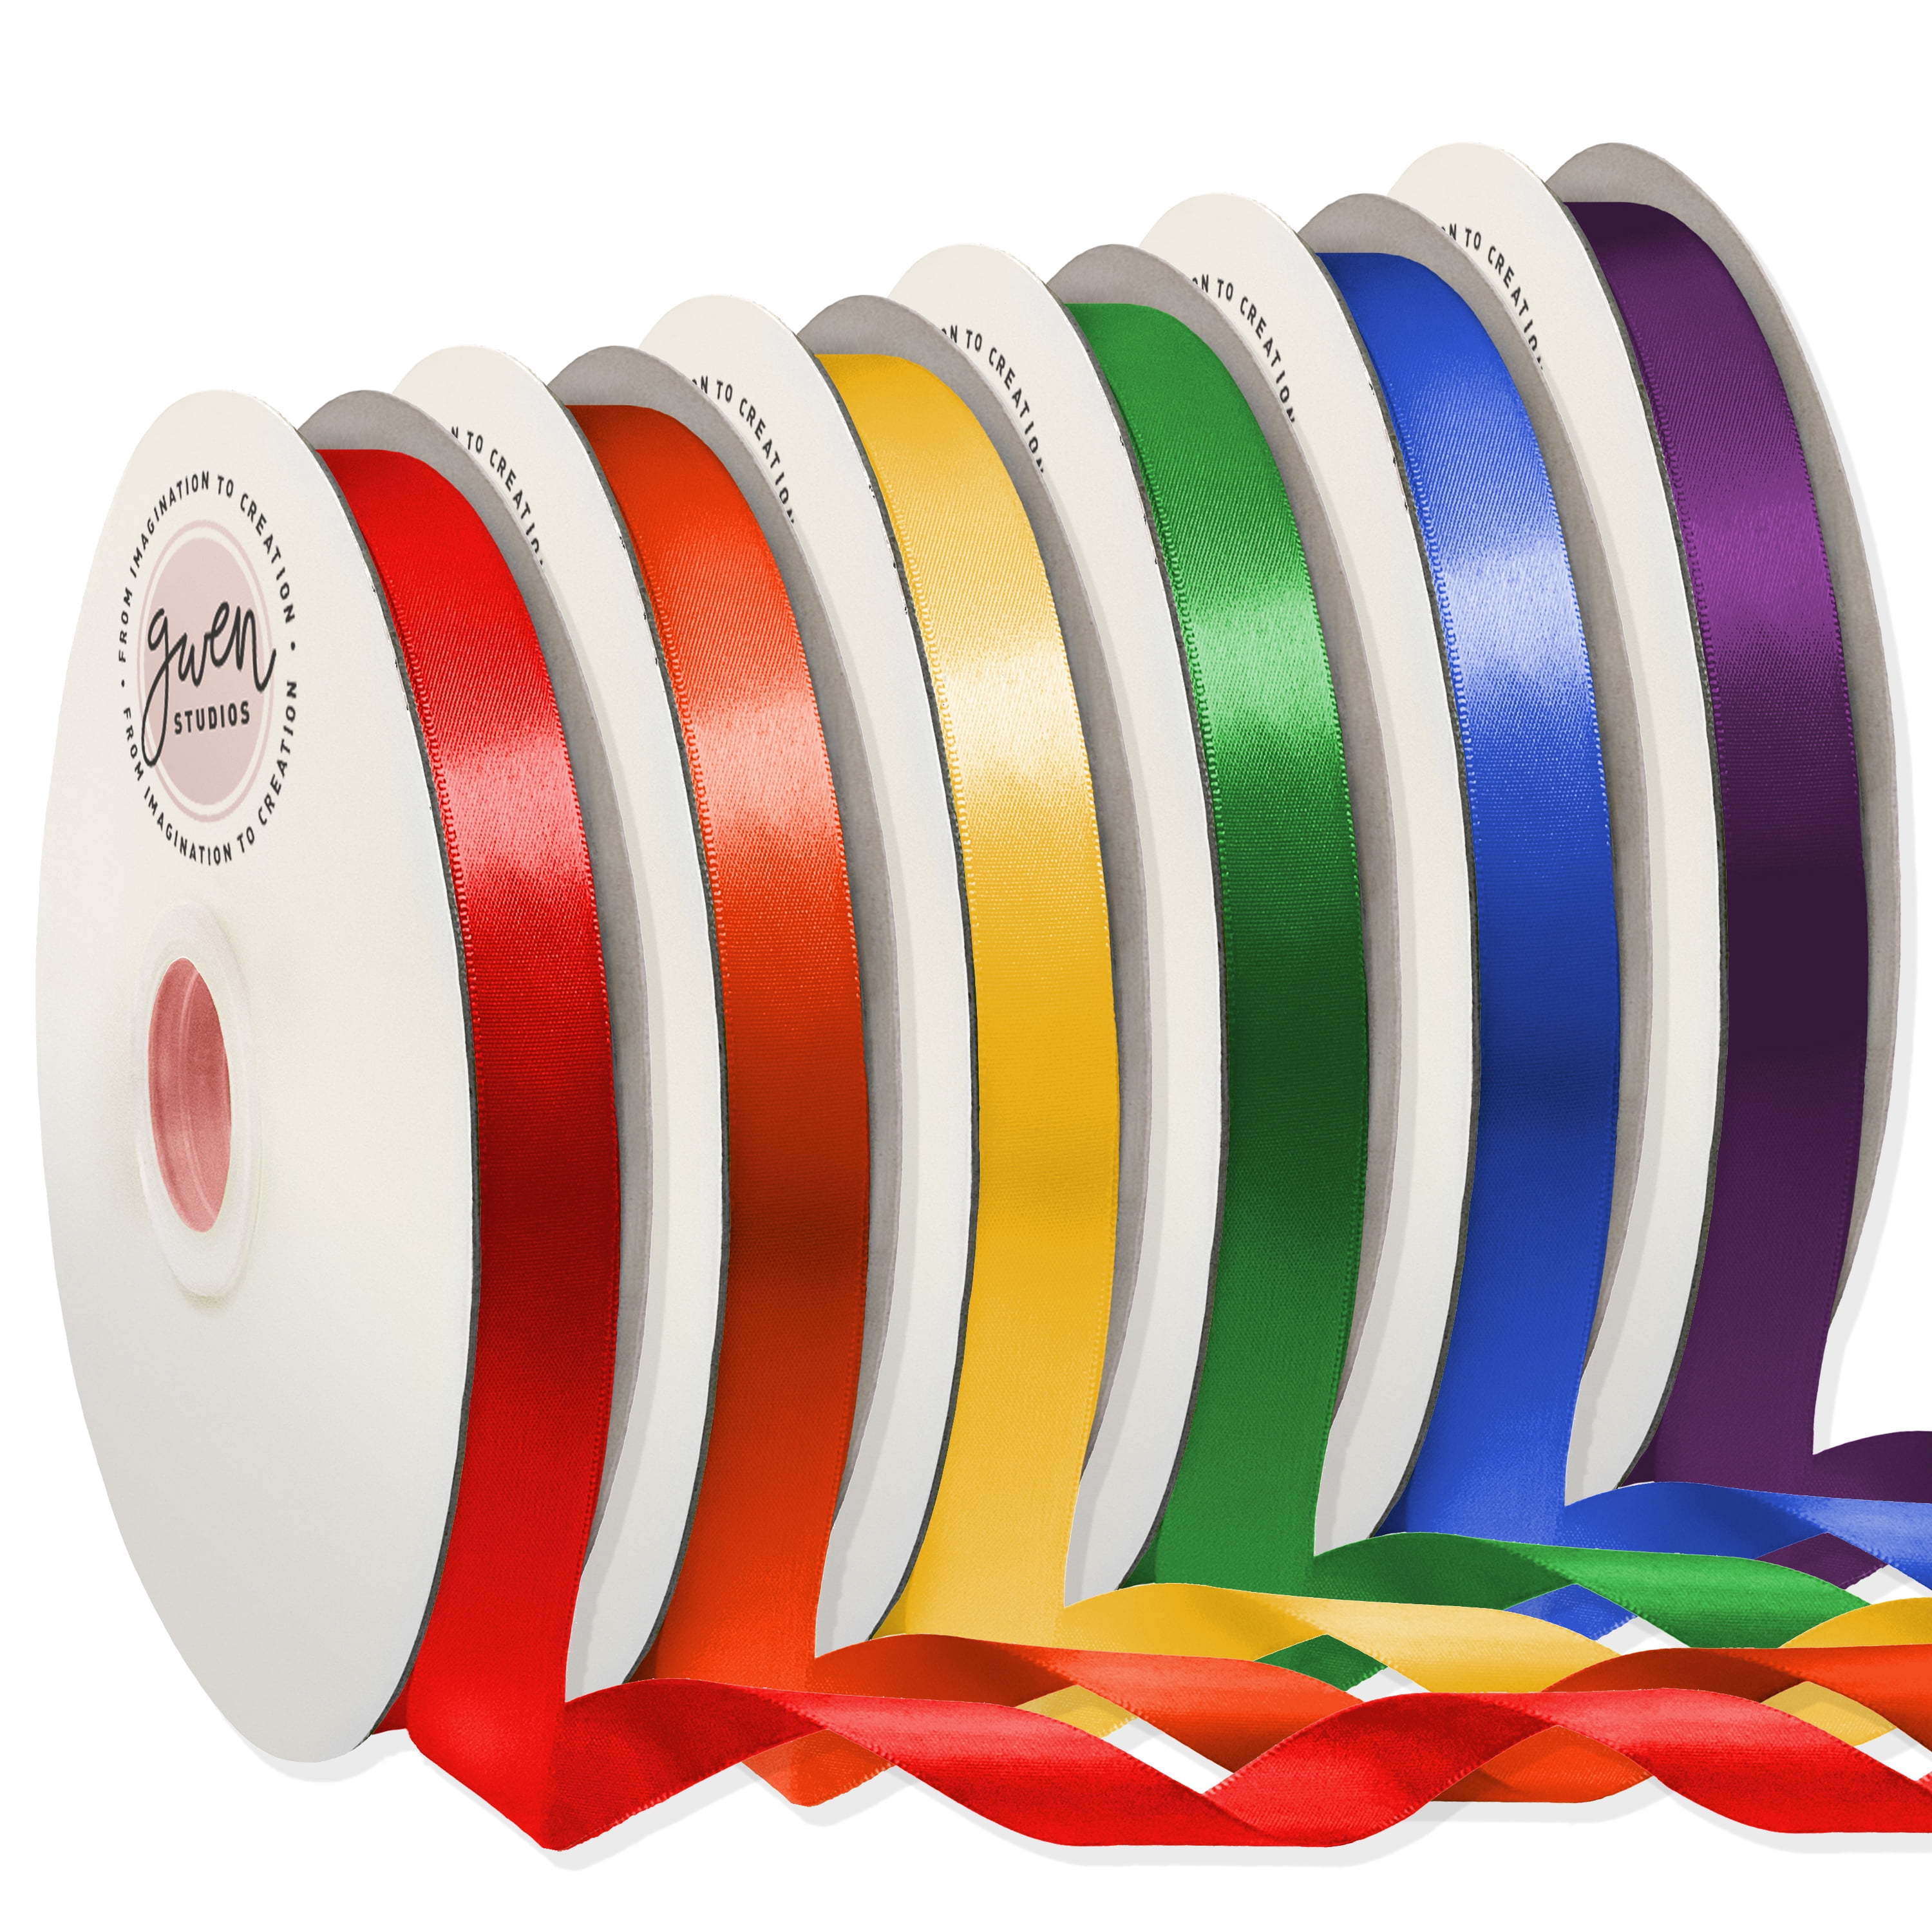 Rainbow Double Faced Satin Ribbon, 6 Colors, 5/8 x 600 Yards by Gwen Studios